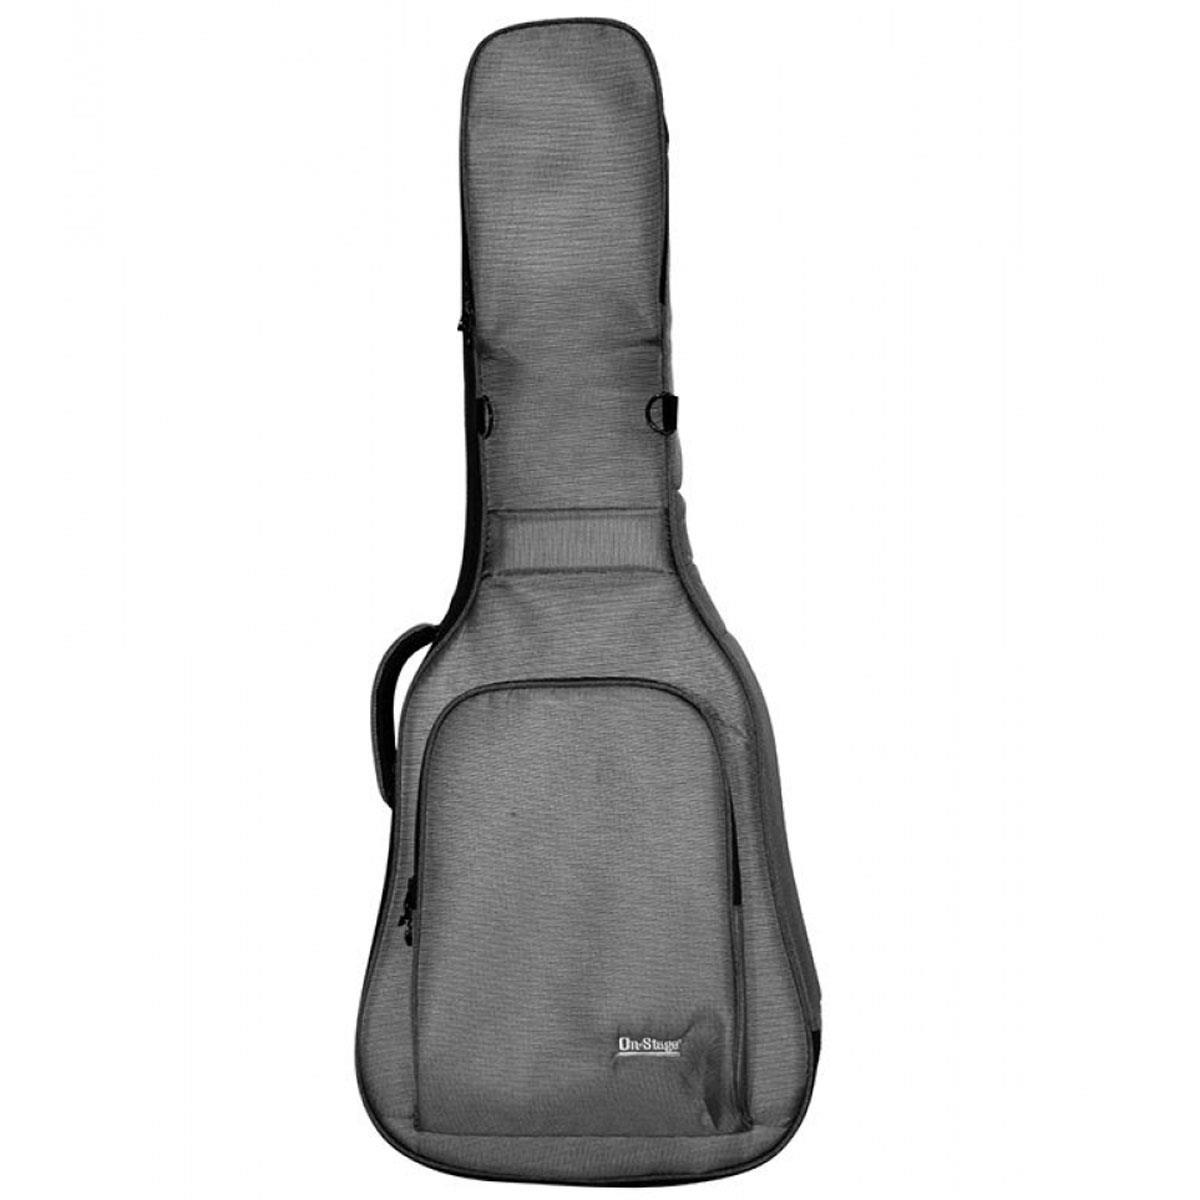 

On-Stage GBC4990 Deluxe Classical Guitar Gig Bag, Charcoal Gray